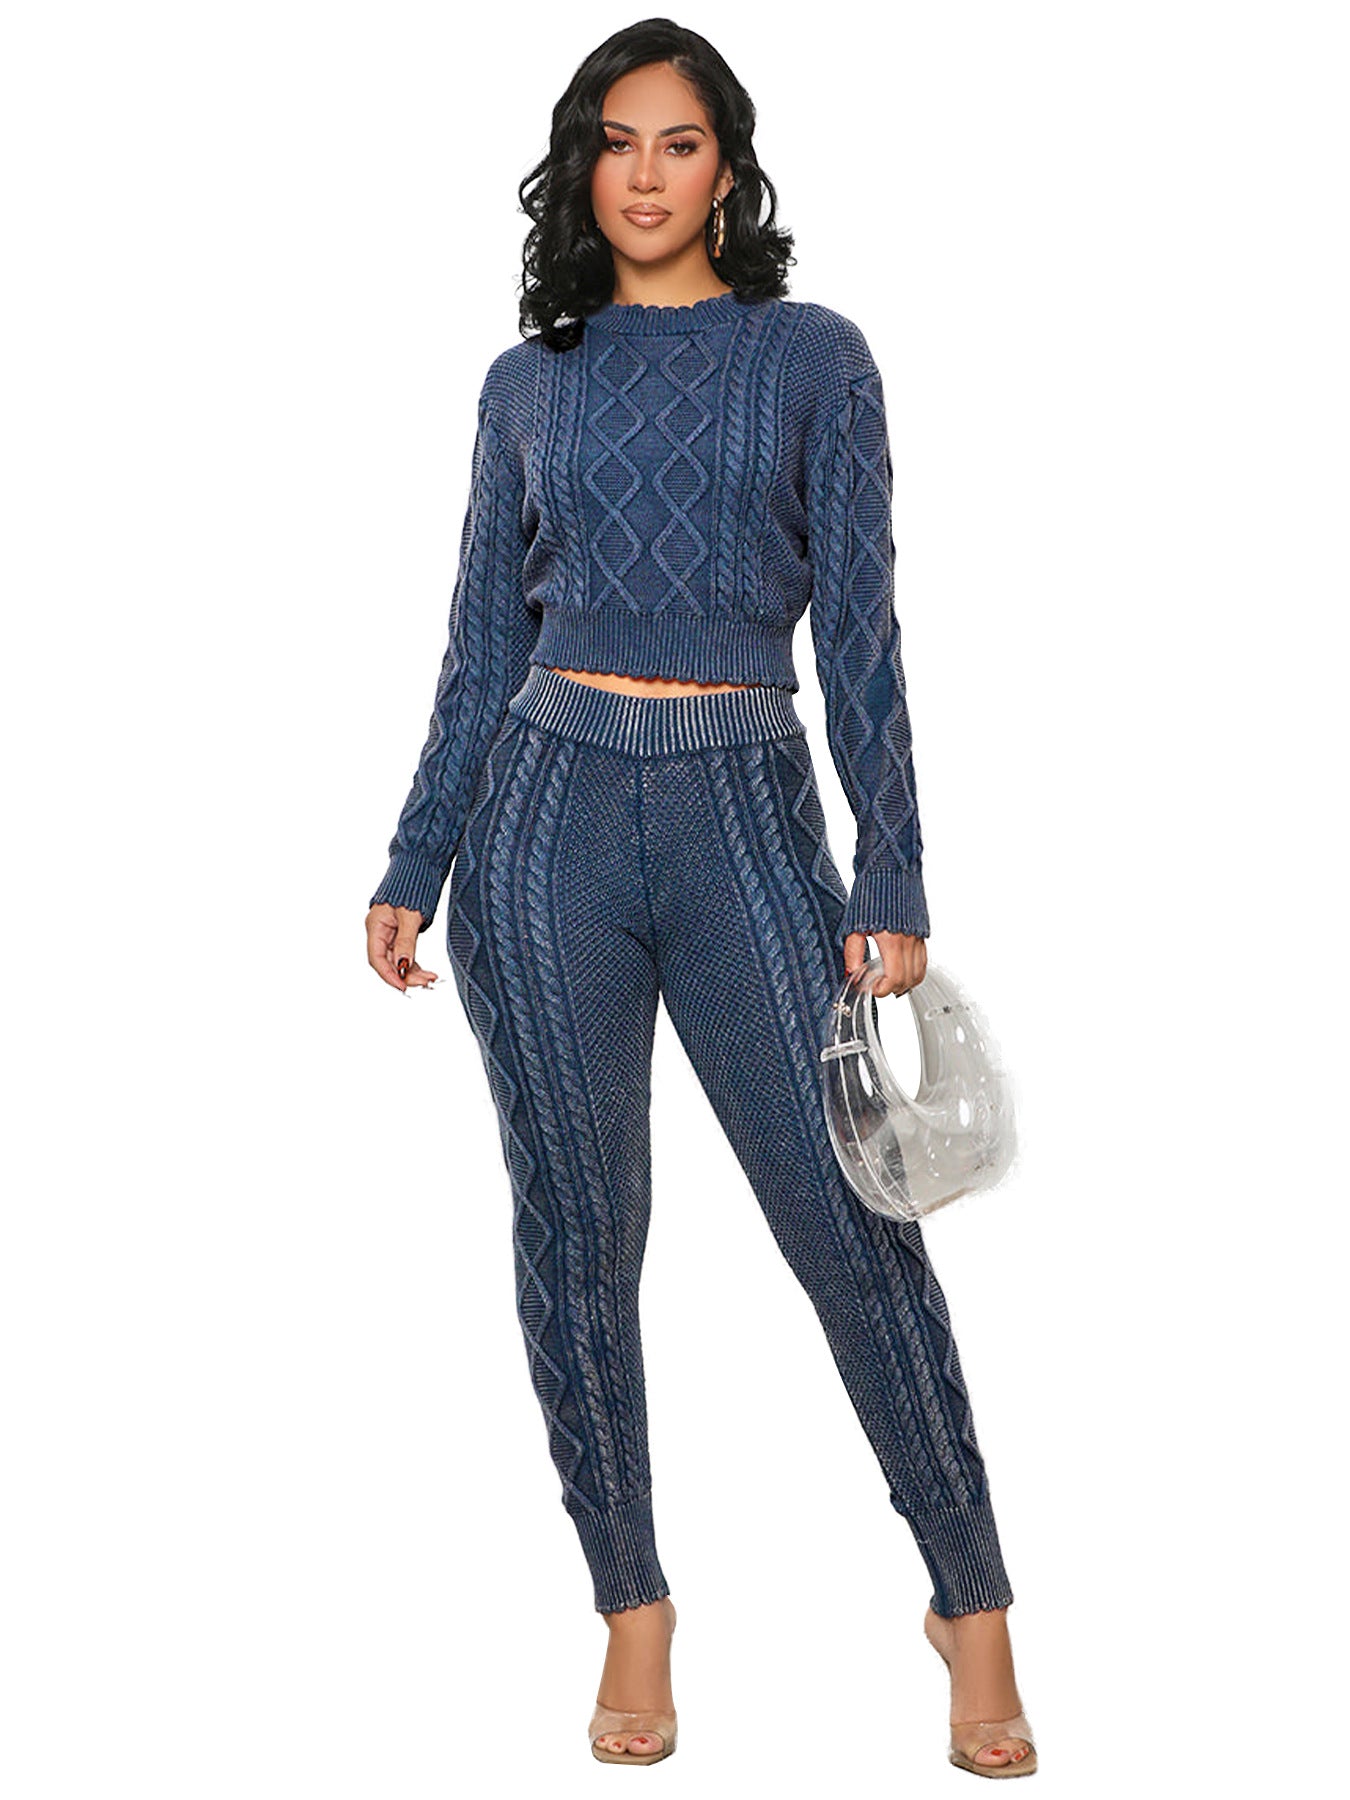 FZ Women's Washed Vintage Knitted Rhombus Plaid Cable Sweater Pants Suit ShineRay